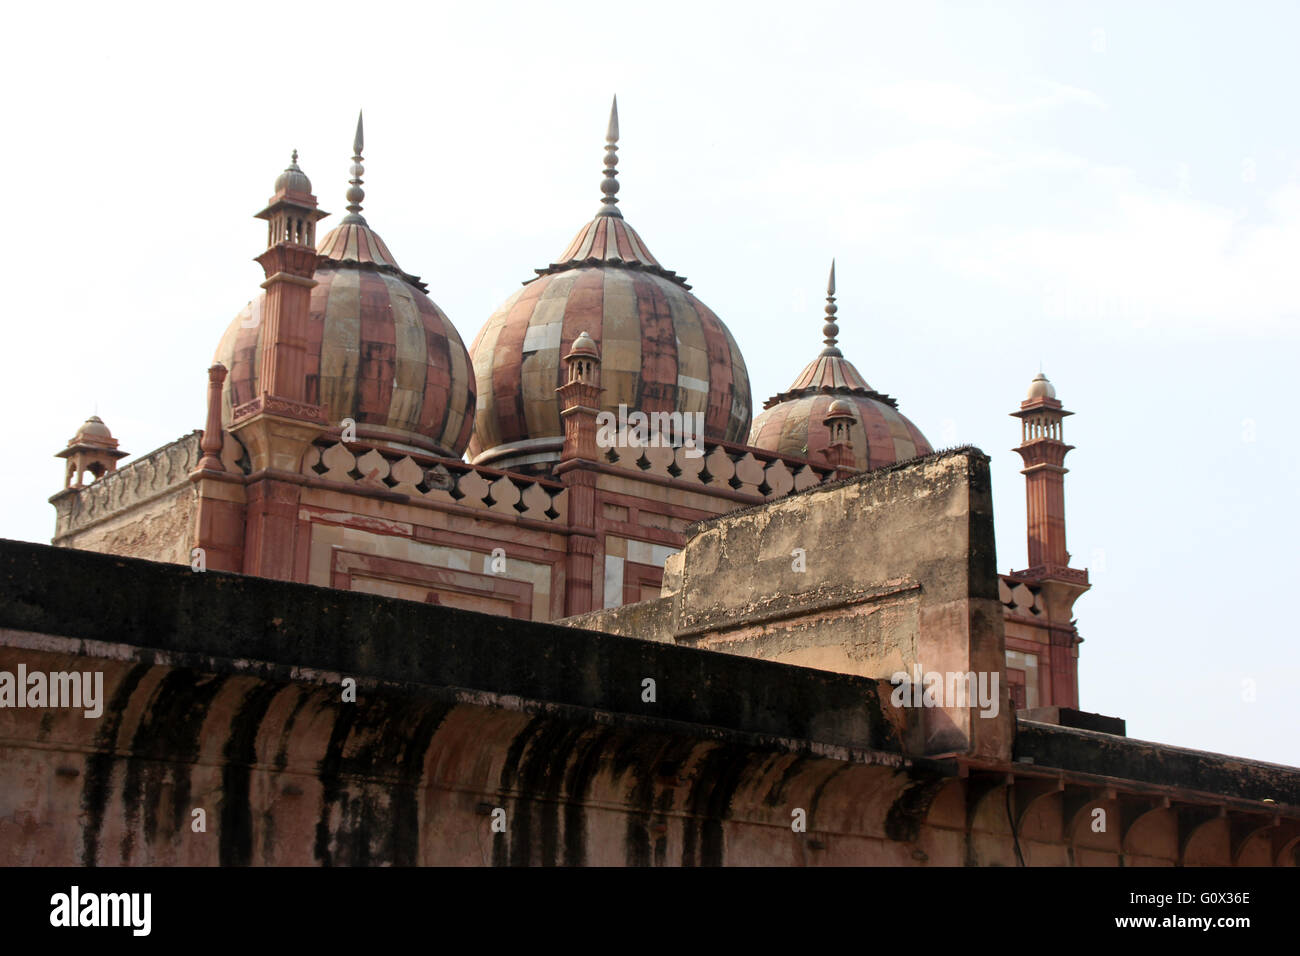 Three domed mosque near gate of Safdarjung Tomb, pleasing structure with small, striped onion domes, slender cuboidal minarets Stock Photo